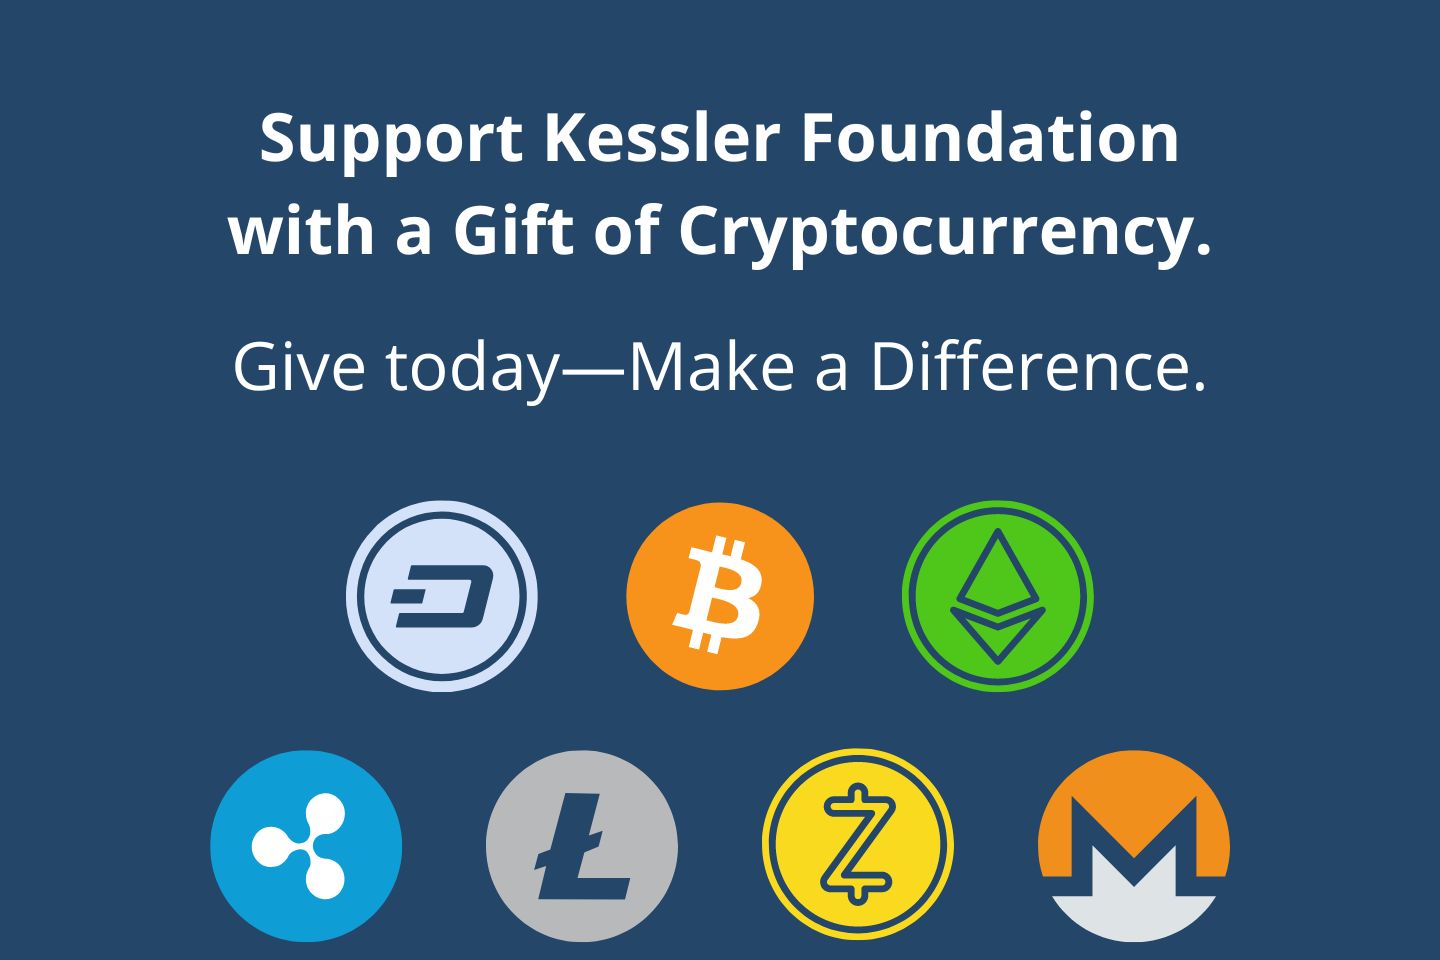 crypto currency donations accepted at Kessler Foundation